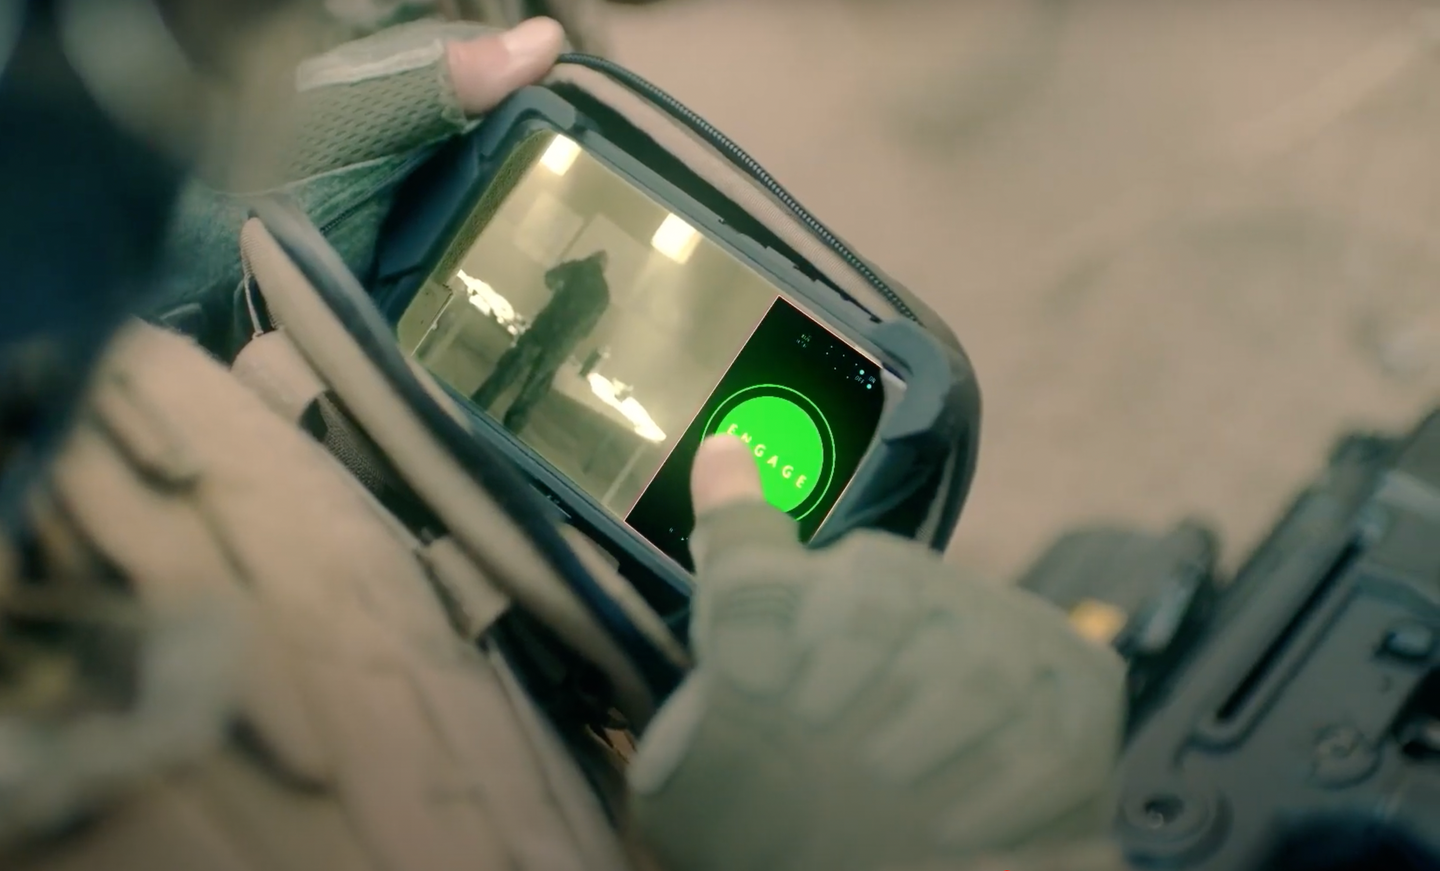 How Elbit is depicting the target engagement selection screen in its LANIUS promotional video. <em>Credit: Elbit screengrab</em>